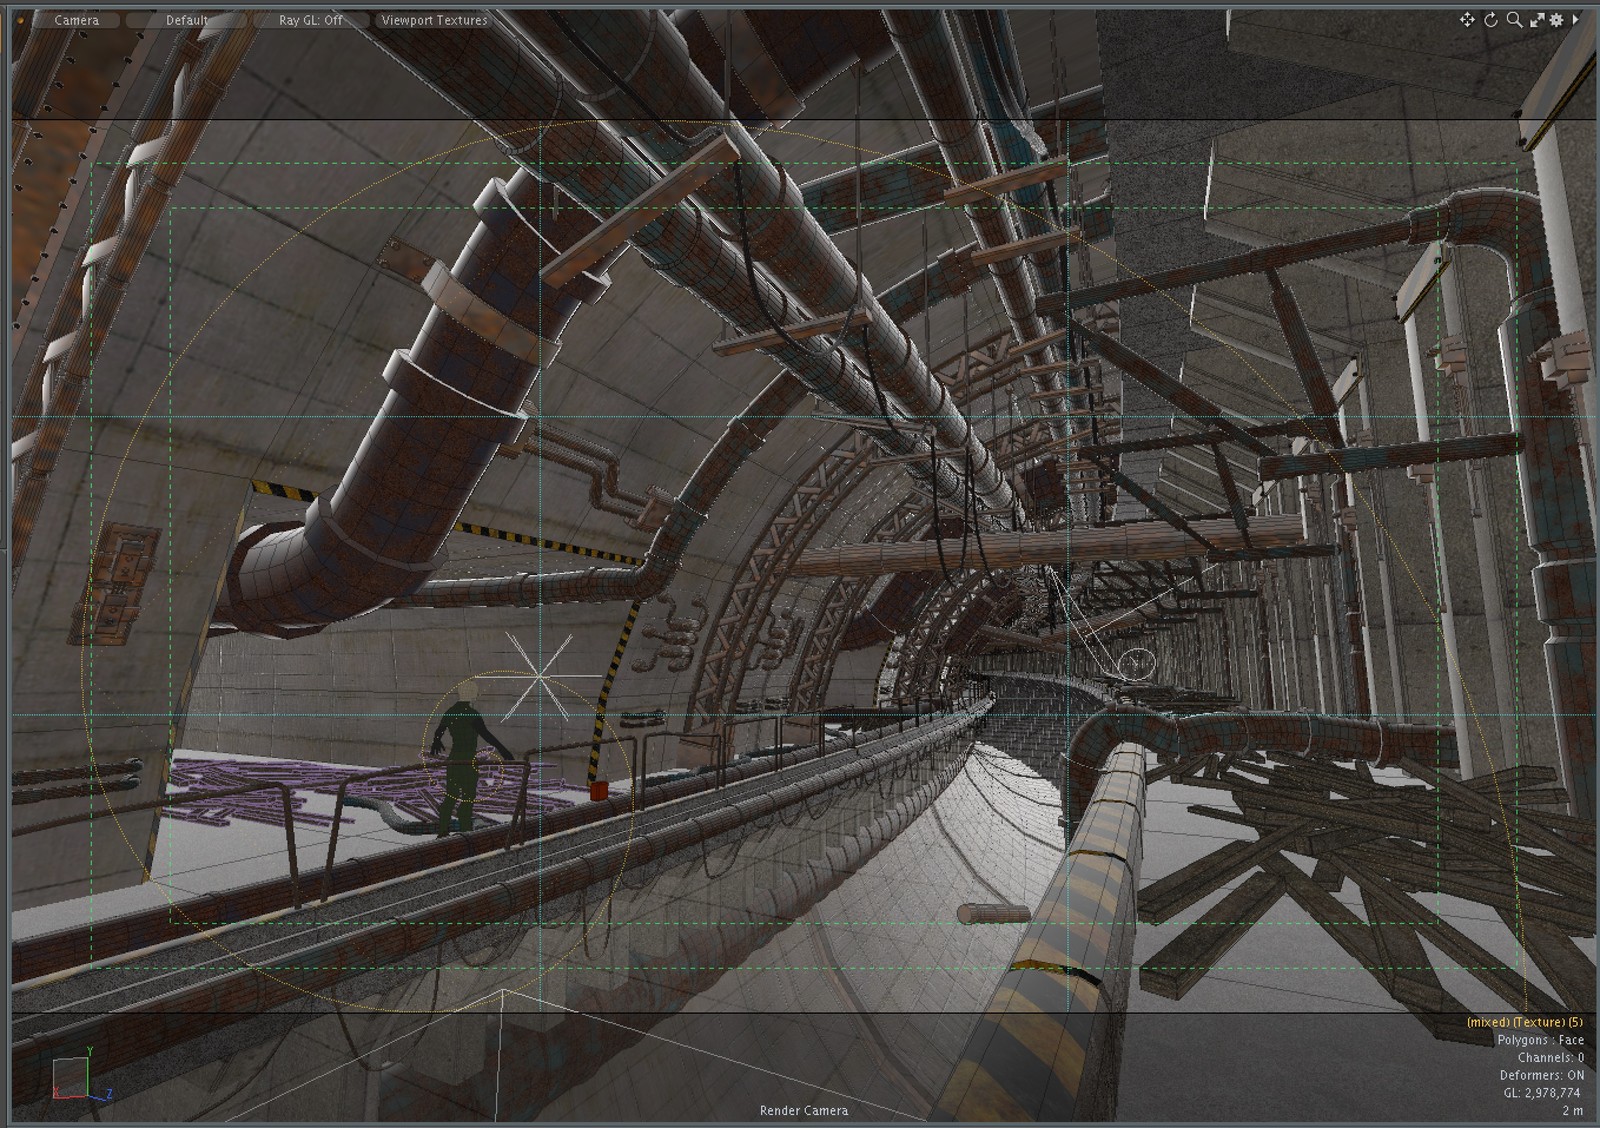 The scene was entirely constructed in Modo, with a bit of help from the model bashing kit. A lot of the objects were repeating elements which were later combined and bent to create the tunnel shape.